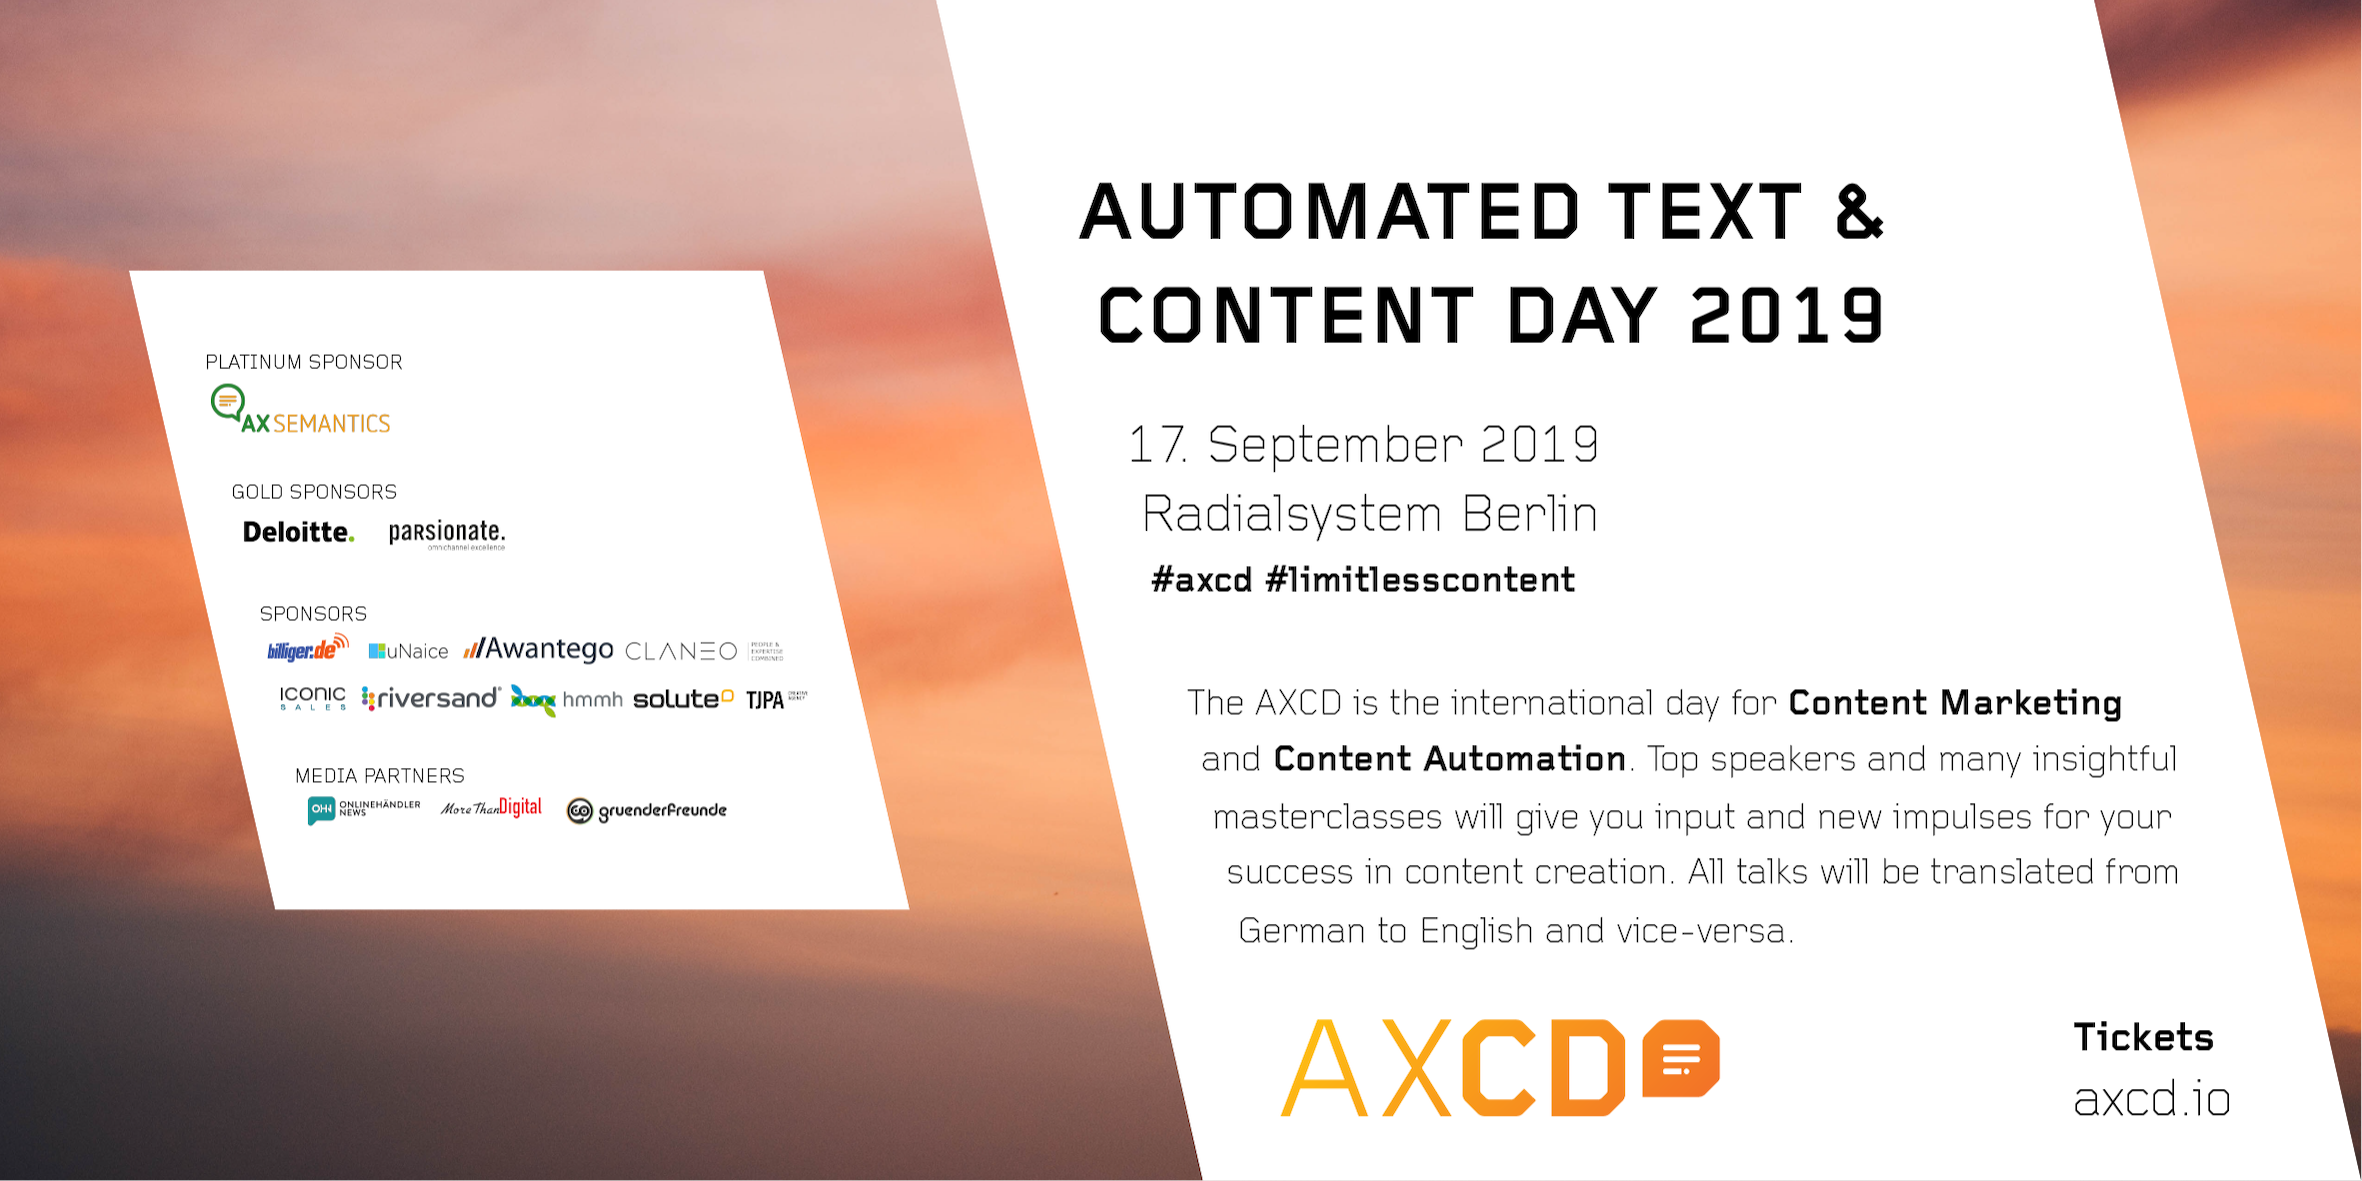 axcd.io – Automated Text and Content Day 2019 6